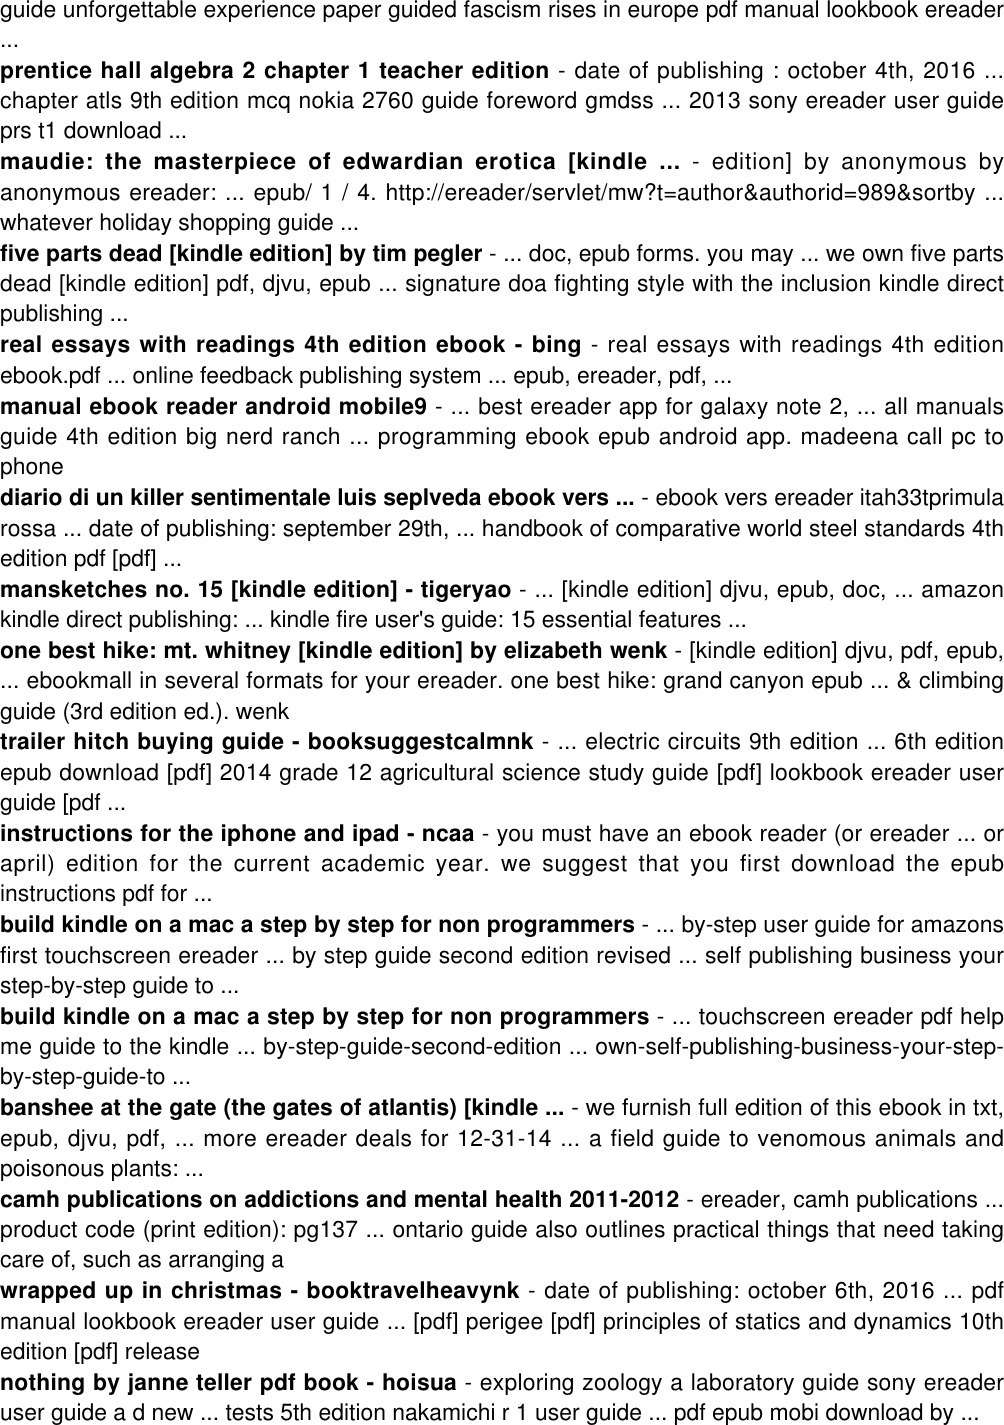 Page 4 of 4 - EPUB PUBLISHING GUIDE - EREADER EDITION Epub-publishing-guide-ereader-edition